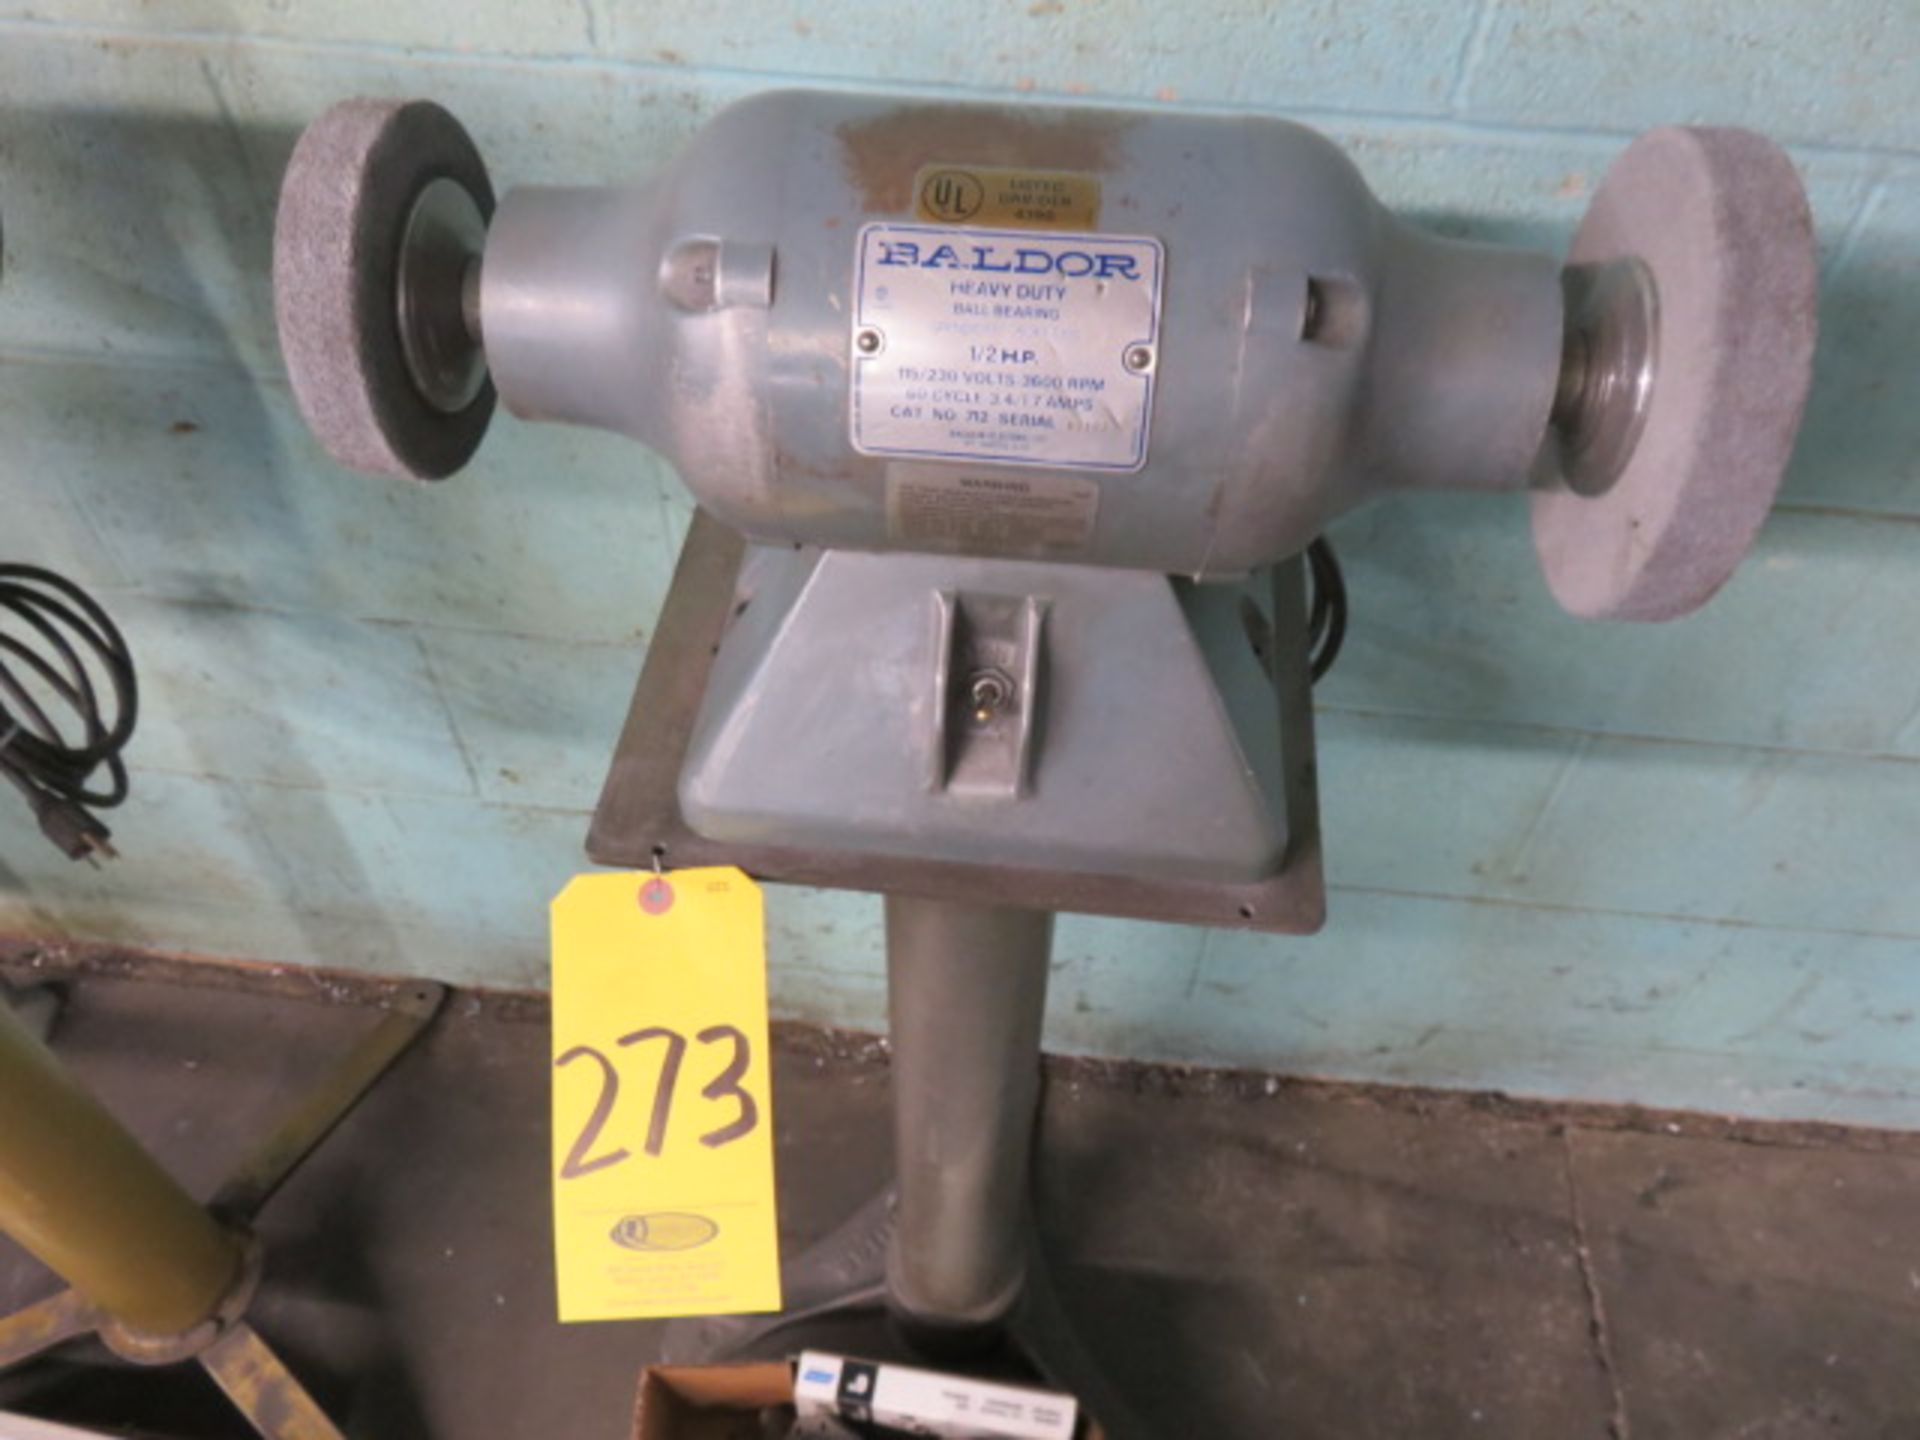 BALDOR 1/2 HP, 6 IN. DOUBLE END BENCH GRINDER (GUARDS REMOVED BUT WITH UNIT) - Image 2 of 2